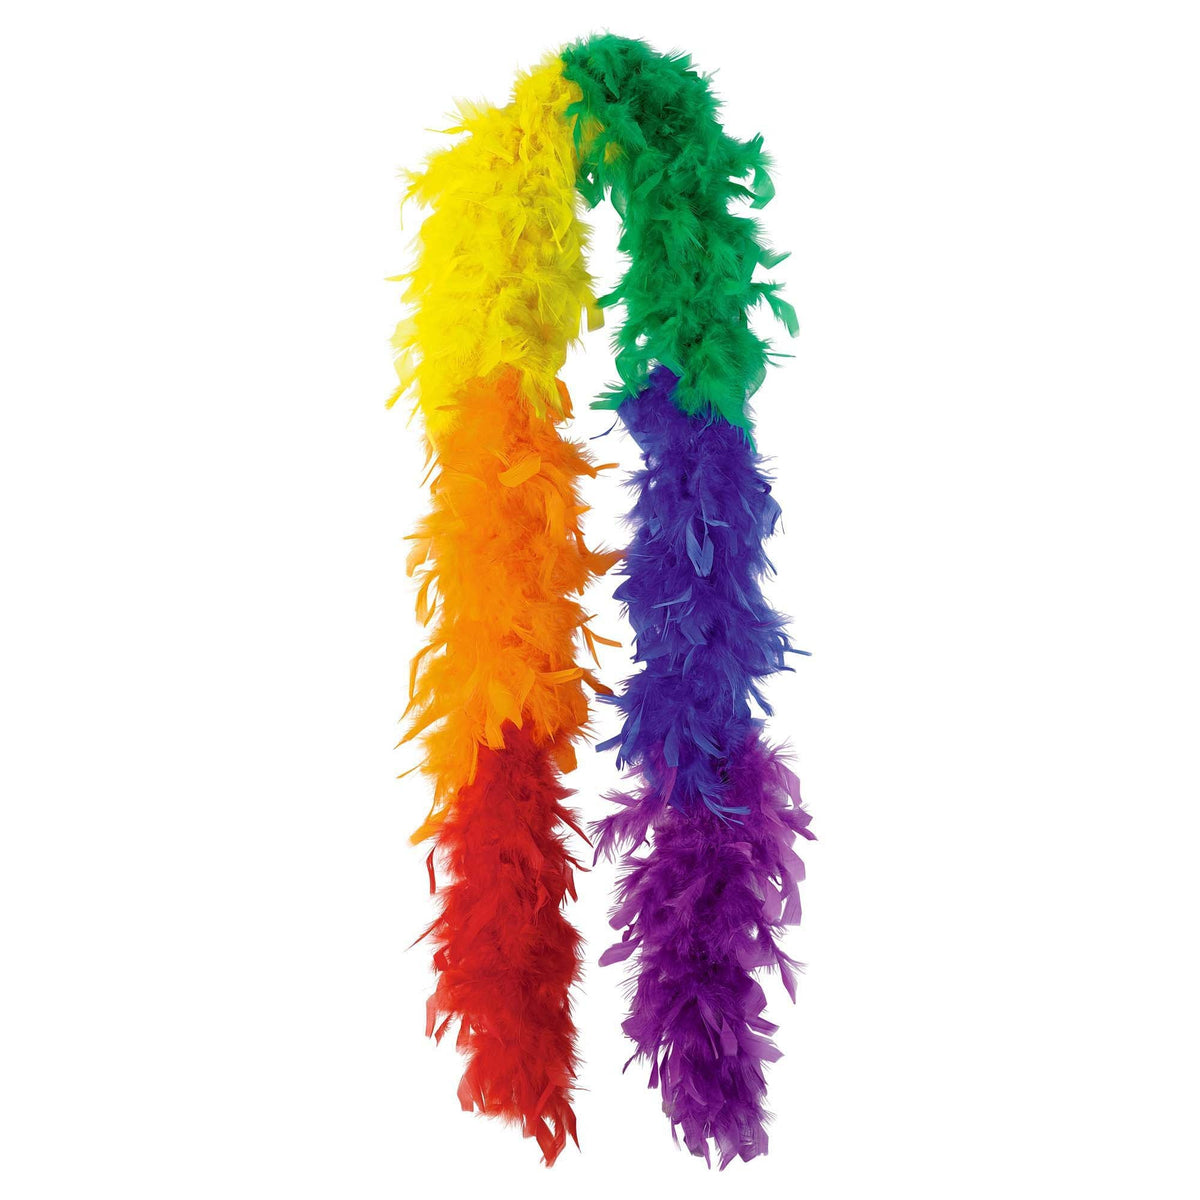 AMSCAN CA Costume Accessories Rainbow Feather Boa, 72 Inches, 1 Count 013051386382